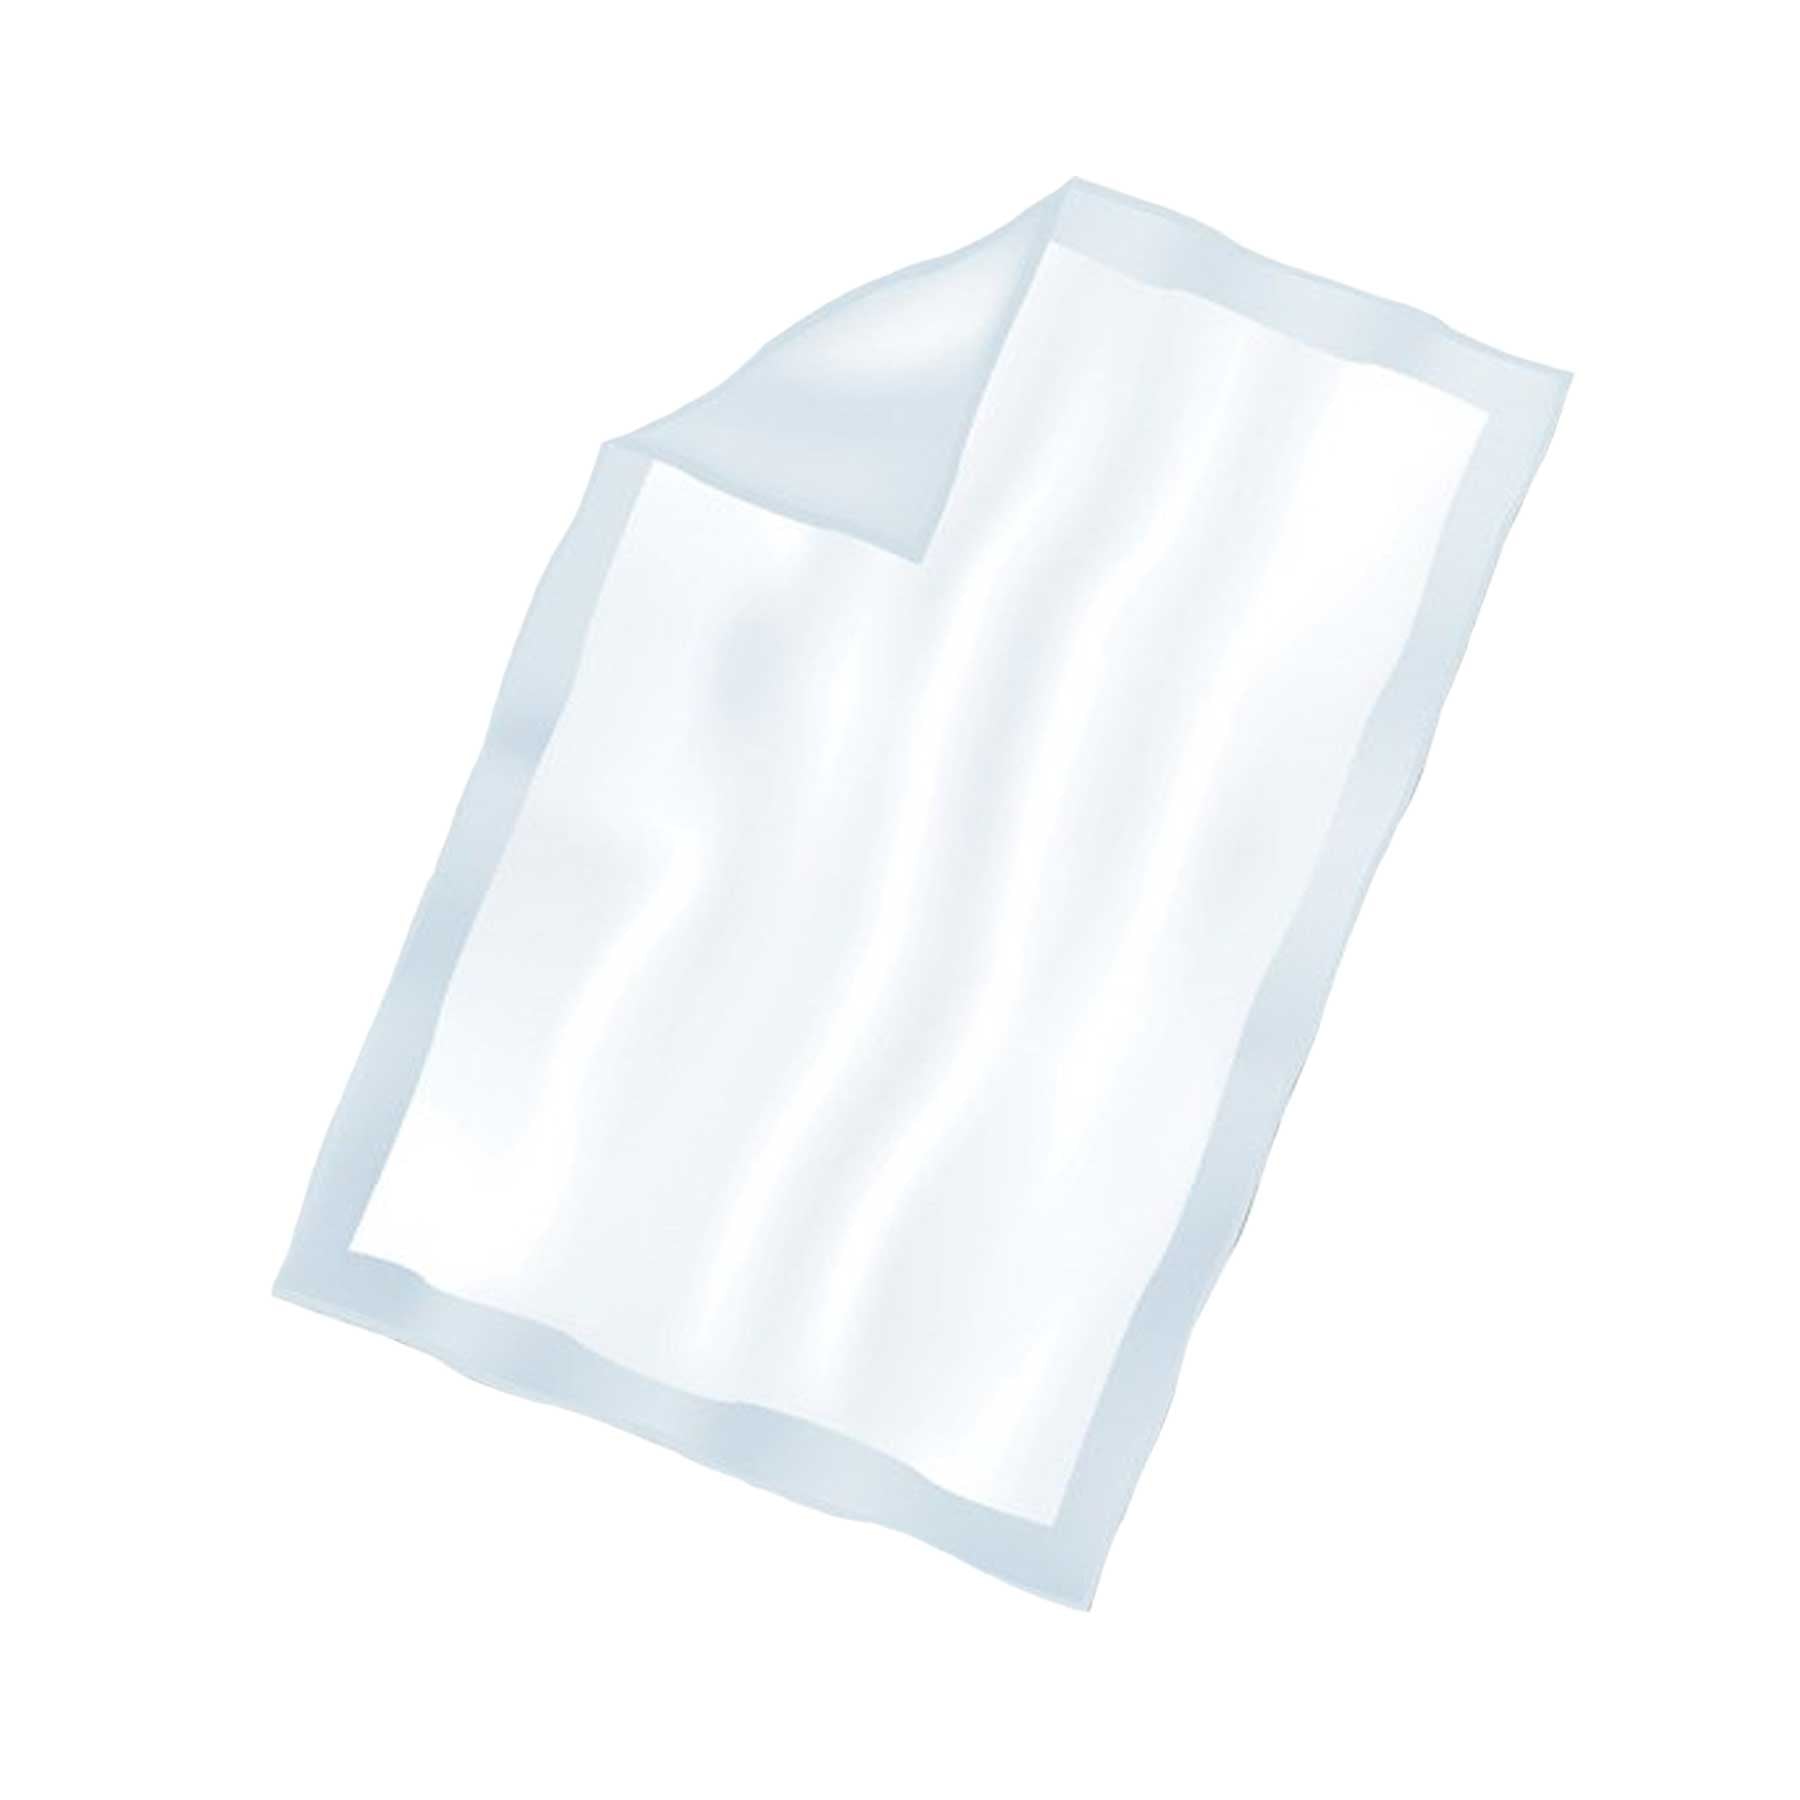 Washable Bed Pads/reusable Incontinence Underpads 30x36-4 Pack